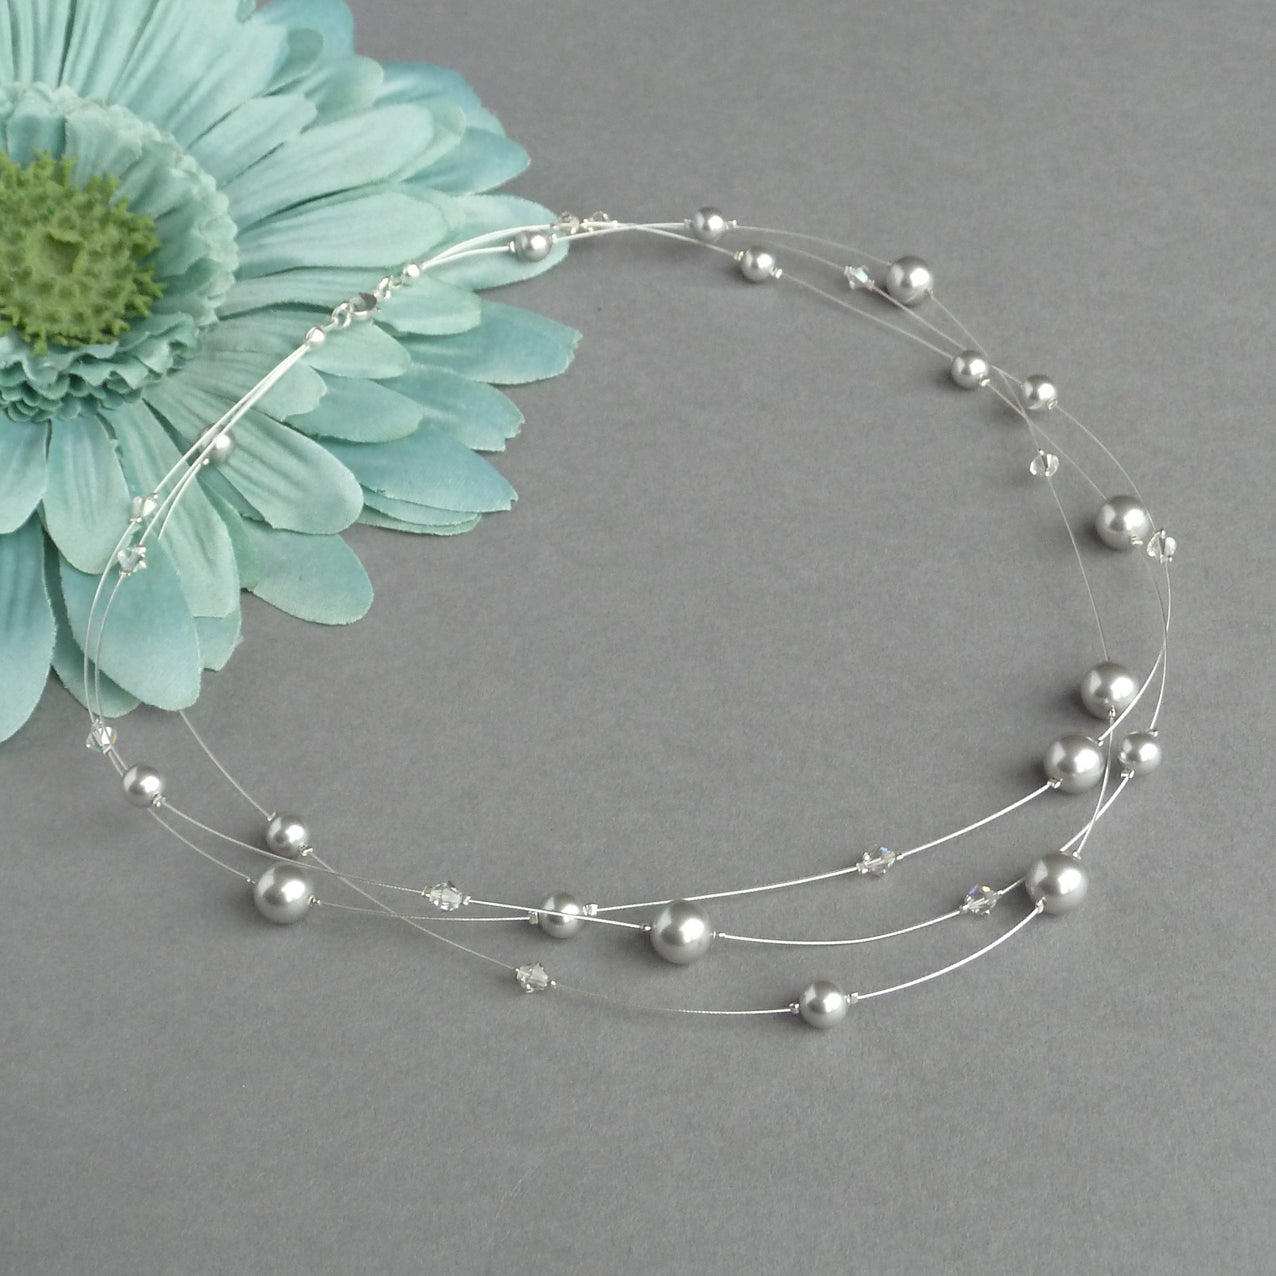 Dainty light grey pearl necklace